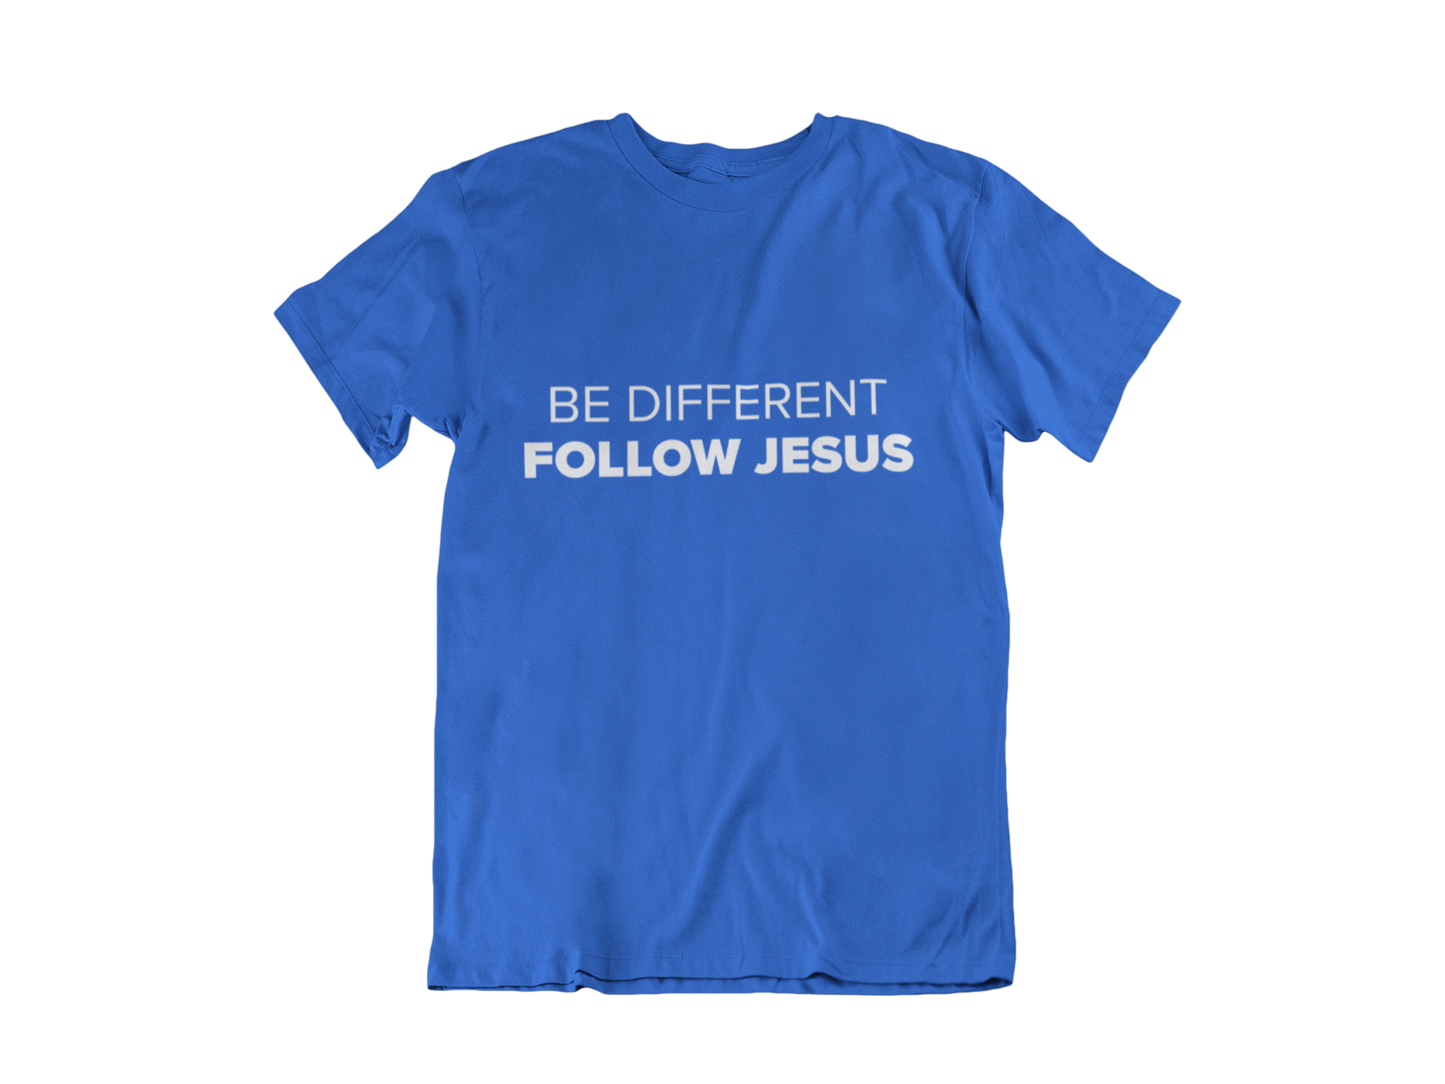 BE DIFFERENT FOLLOW JESUS BLUE - CHRISTIAN CLOTHING